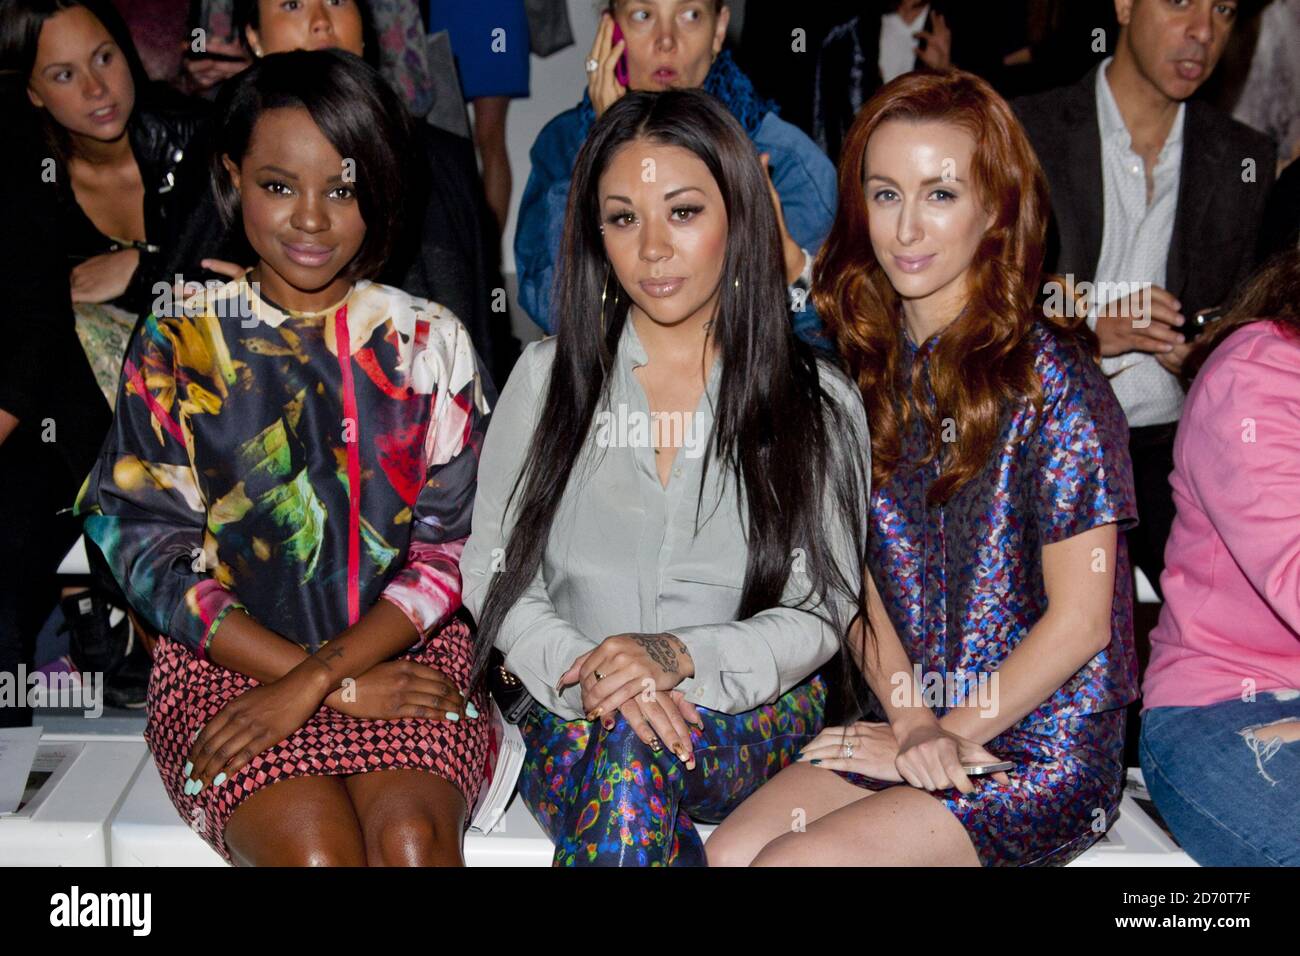 (Left to Right) Keisha Buchanan, Mutya Buena and Siobhan Donaghy of MKS attending the Sister by Sibling fashion show, held at the BFC venue in Somerset House as part of London Fashion Week spring/summer 2014. Stock Photo